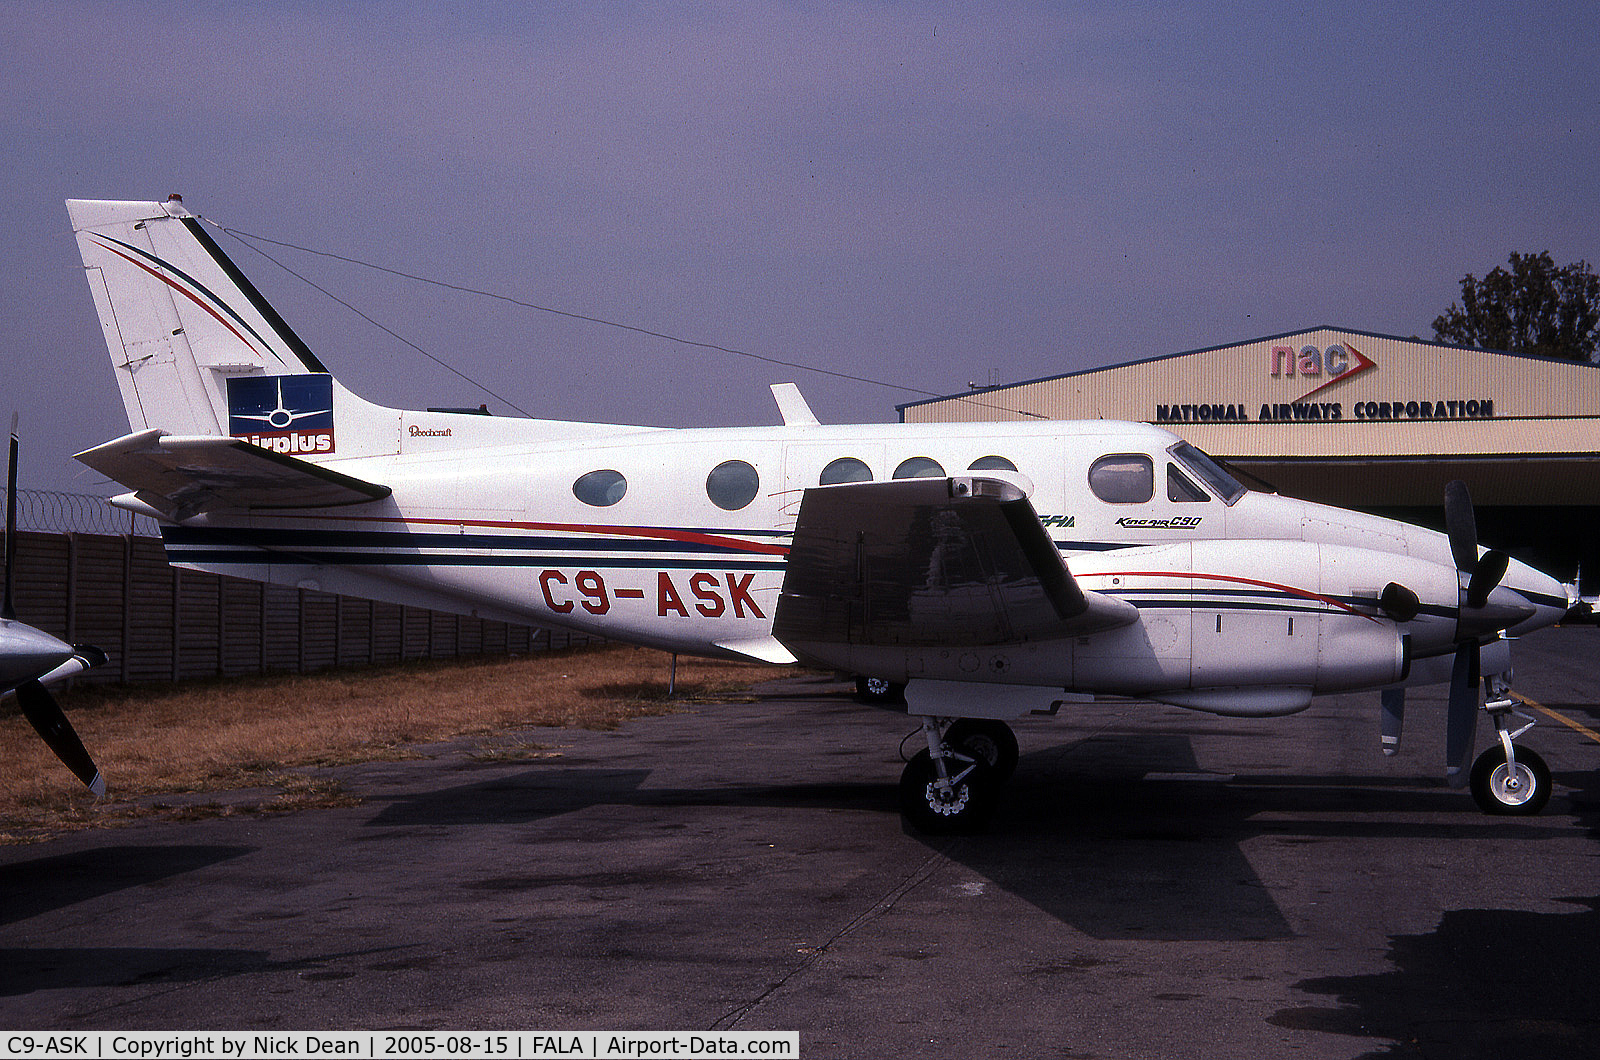 C9-ASK, 1981 Beech C90 King Air C/N LJ-954, Frames like this are the reason I go to Lanseria cant wait to be back there on this coming Sunday